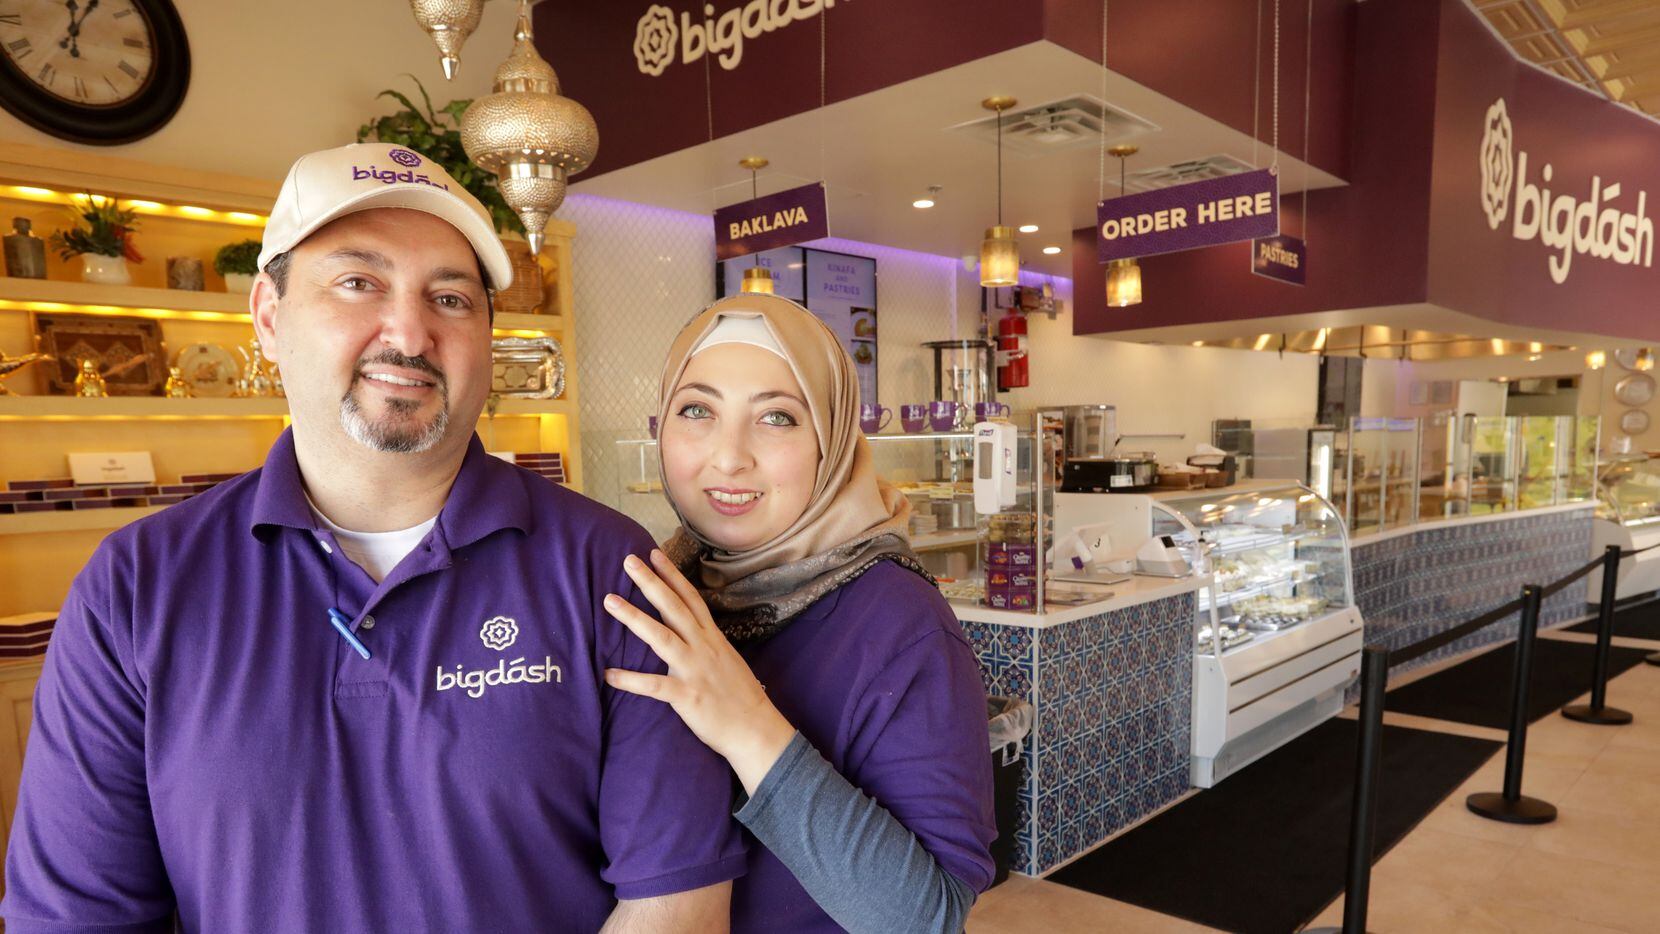 Kareem Alrefaai, left, and Asmaa Khattab pose for a photograph at Big Dash in Frisco, TX, on...